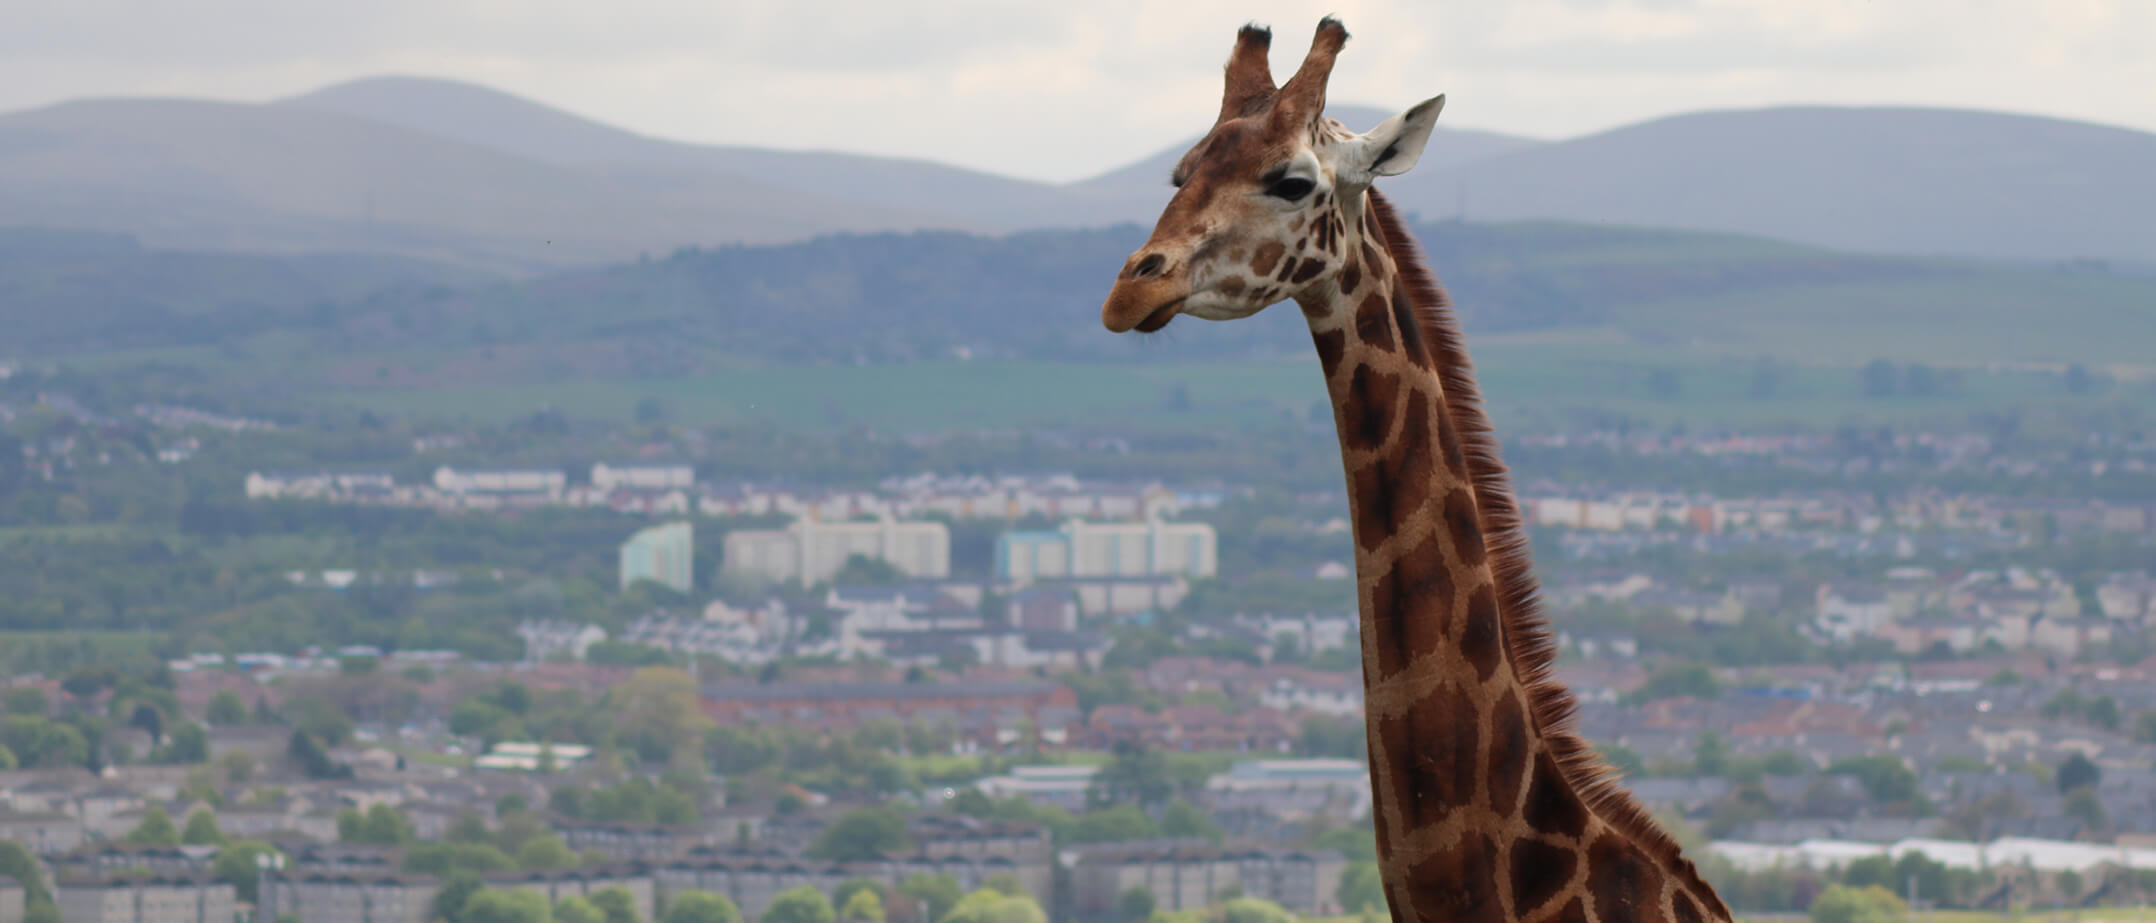 A giraffe at Edinburgh Zoo with the backdrop of the city